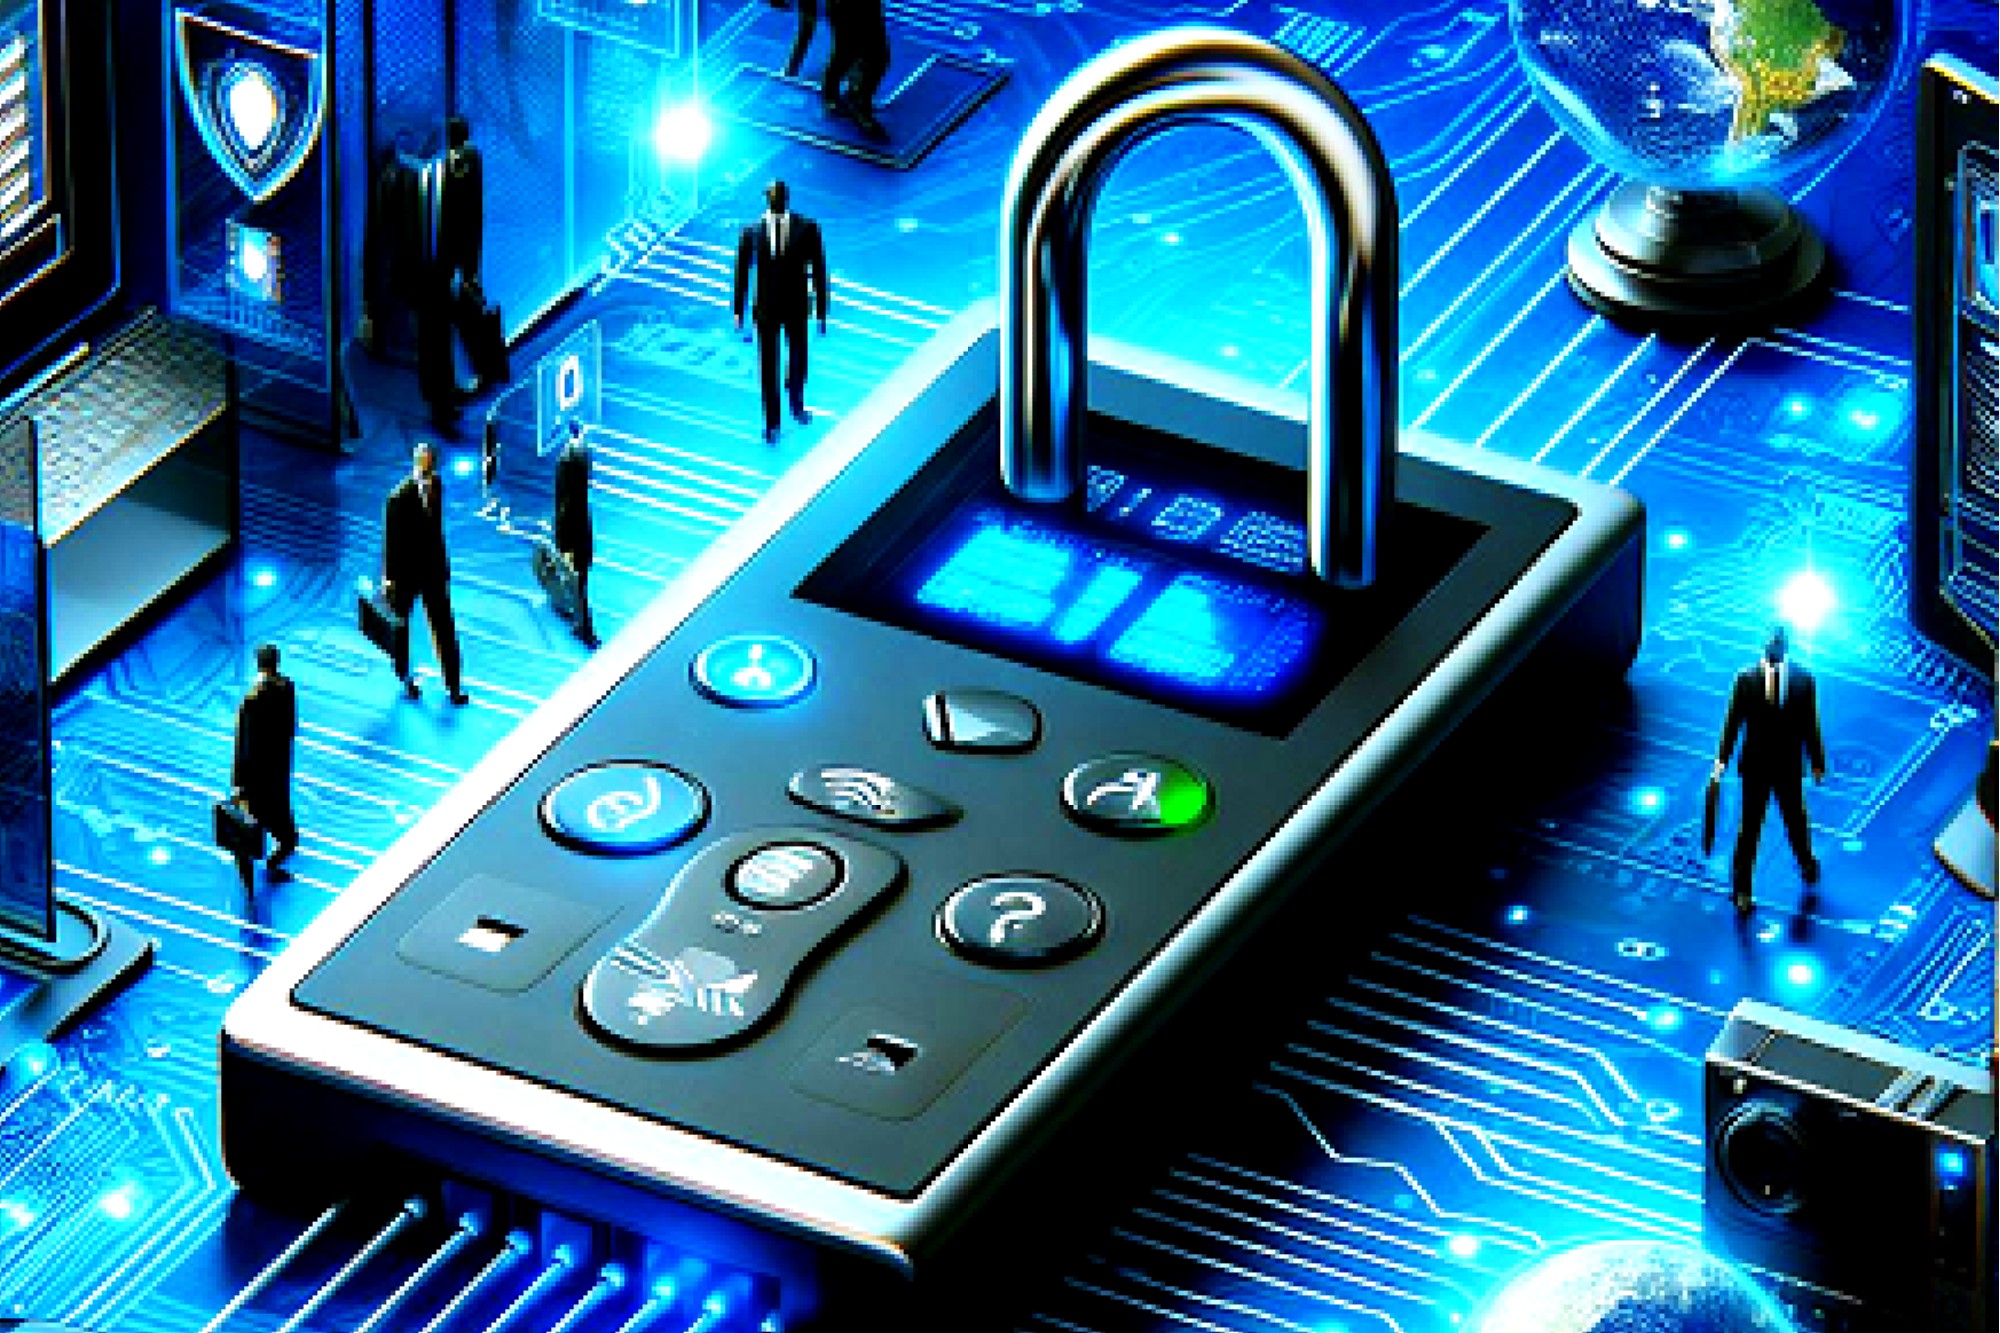 Electronic access control systems market is forecasted to reach US$ 32.5 billion by 2033